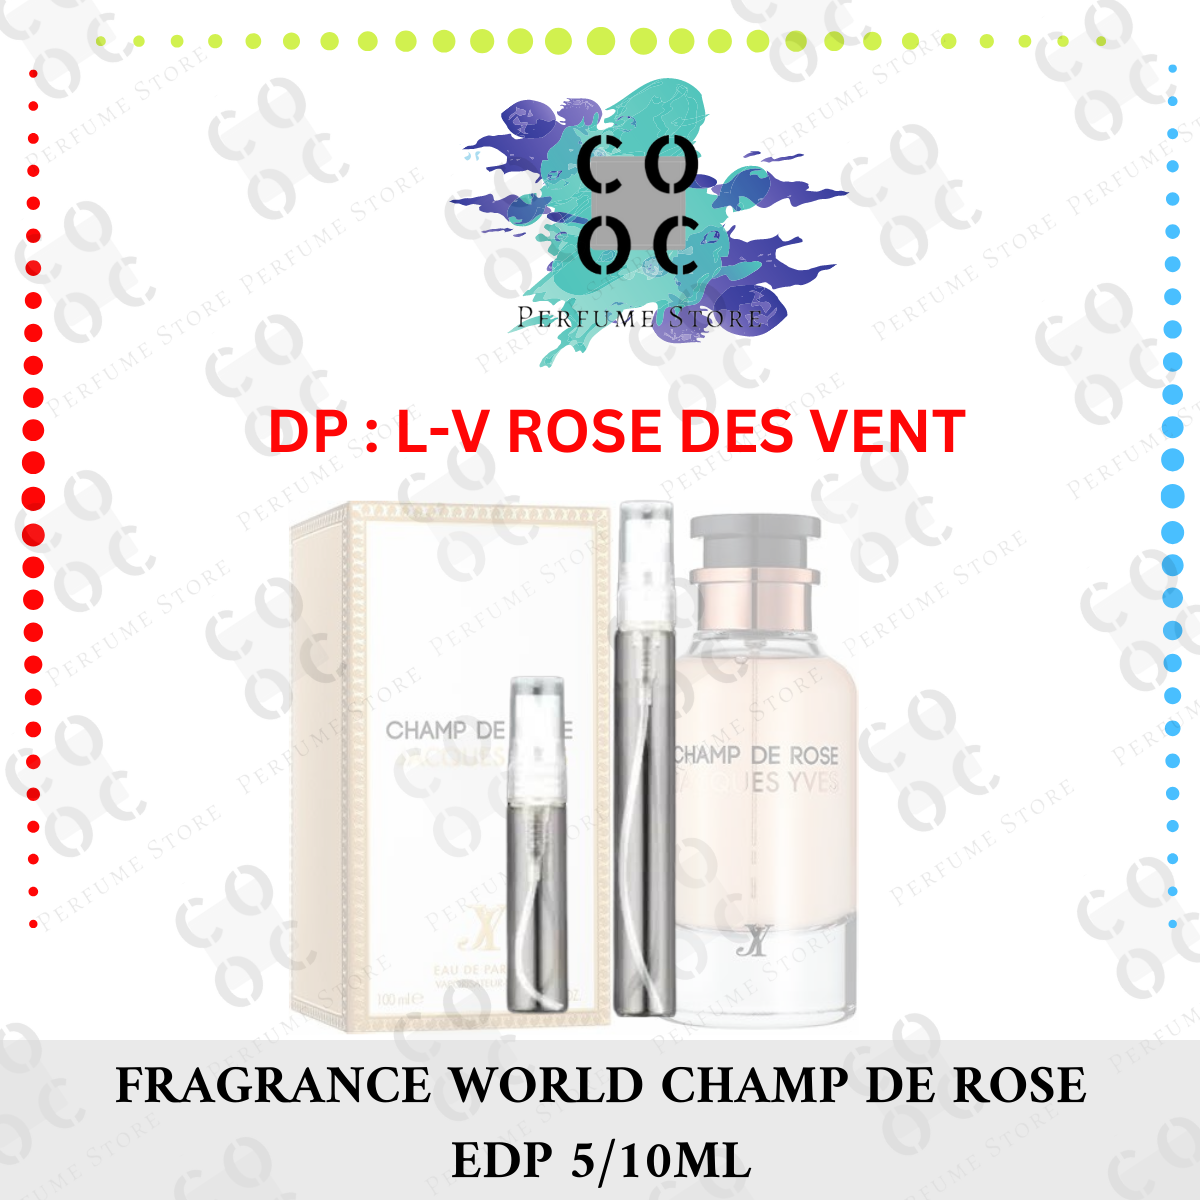 Champ De Rose - Acques Yves EDP - 100ml - Inspired by Rose Des Vents